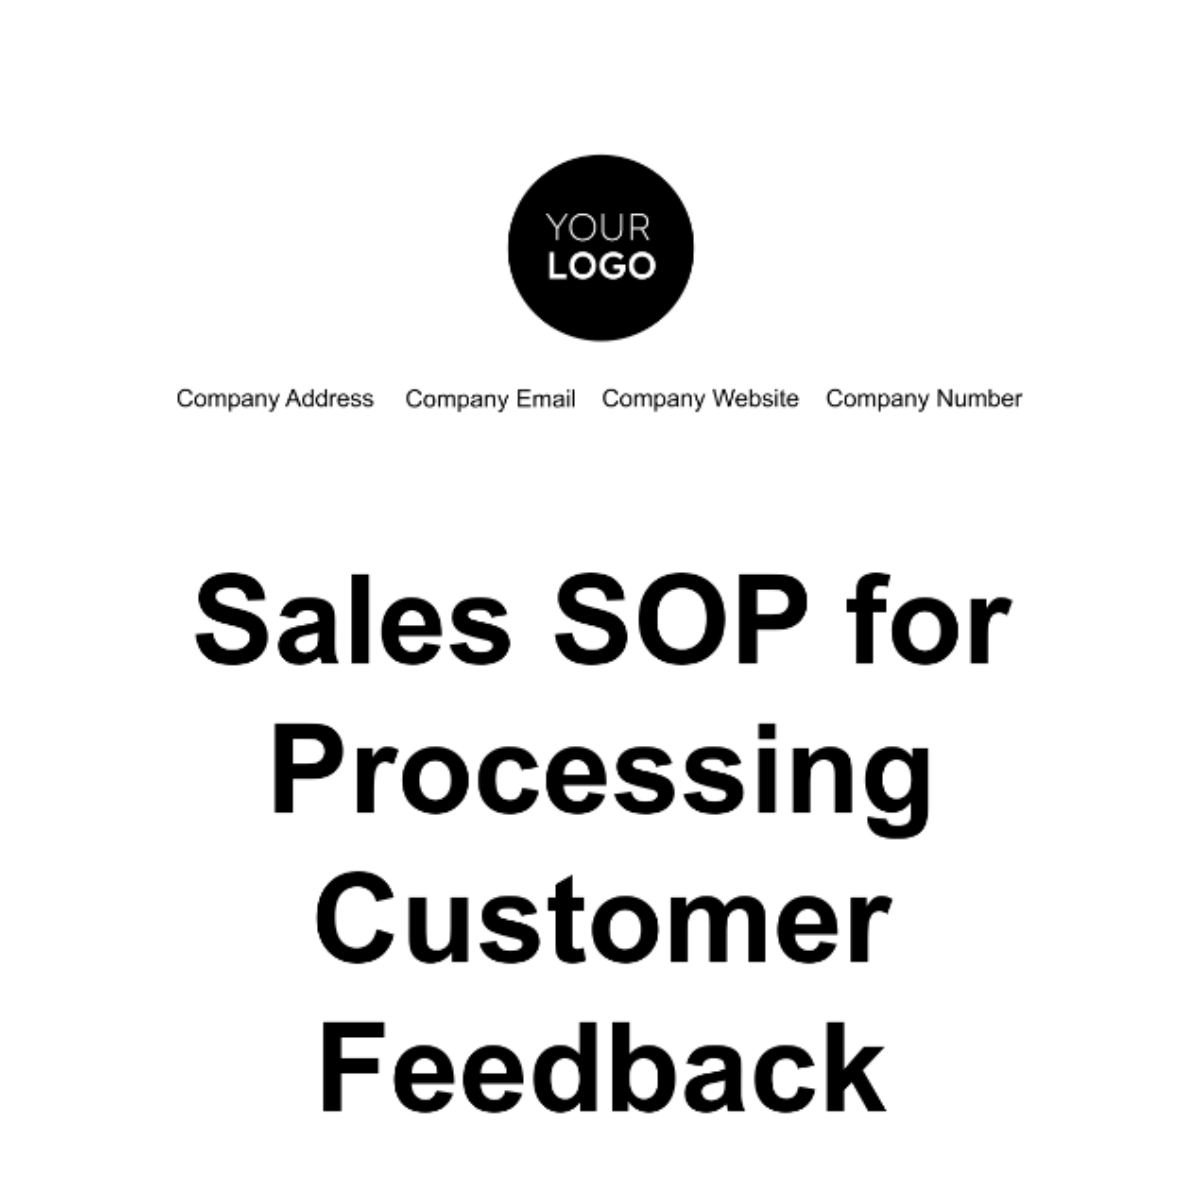 Free Sales SOP for Processing Customer Feedback Template